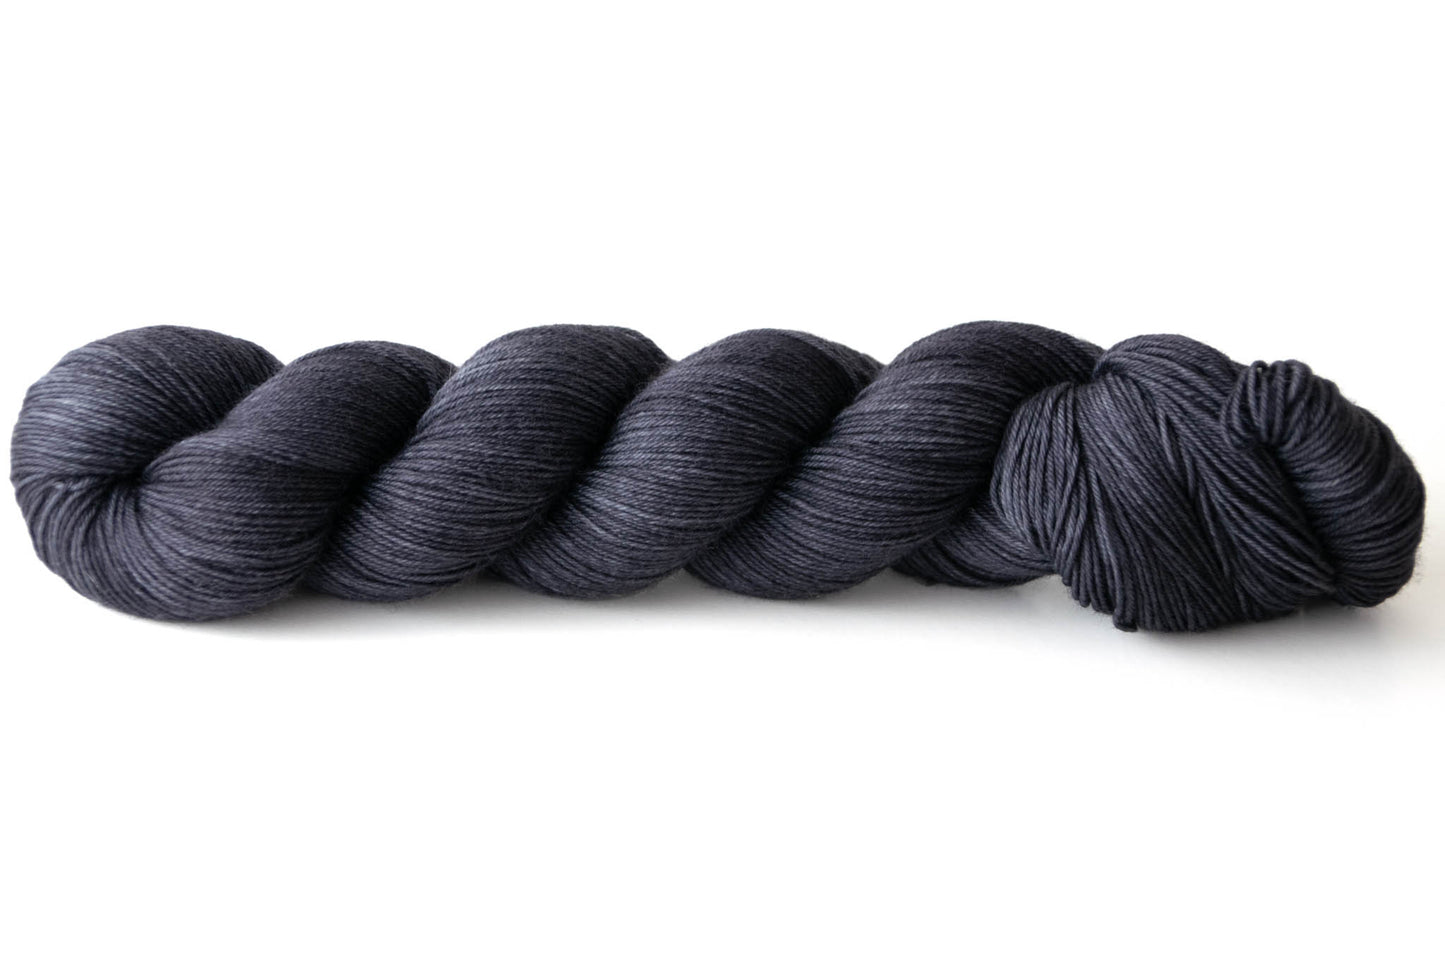 A skein of almost black hand-dyed wool yarn.